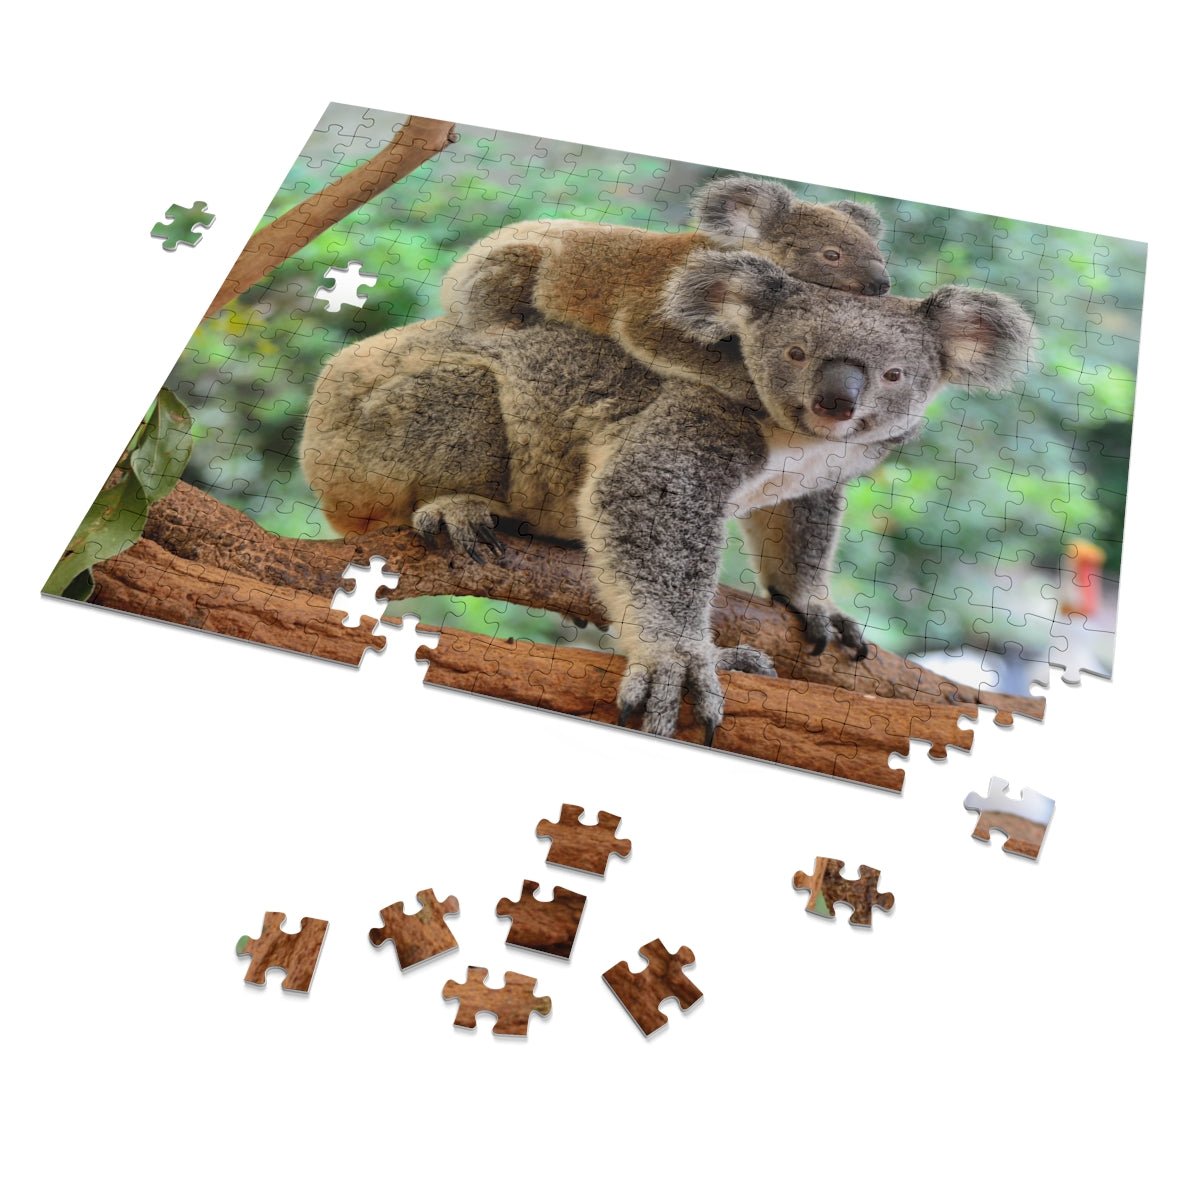 Mom and Baby Koala Bears Jigsaw Puzzle - Puffin Lime